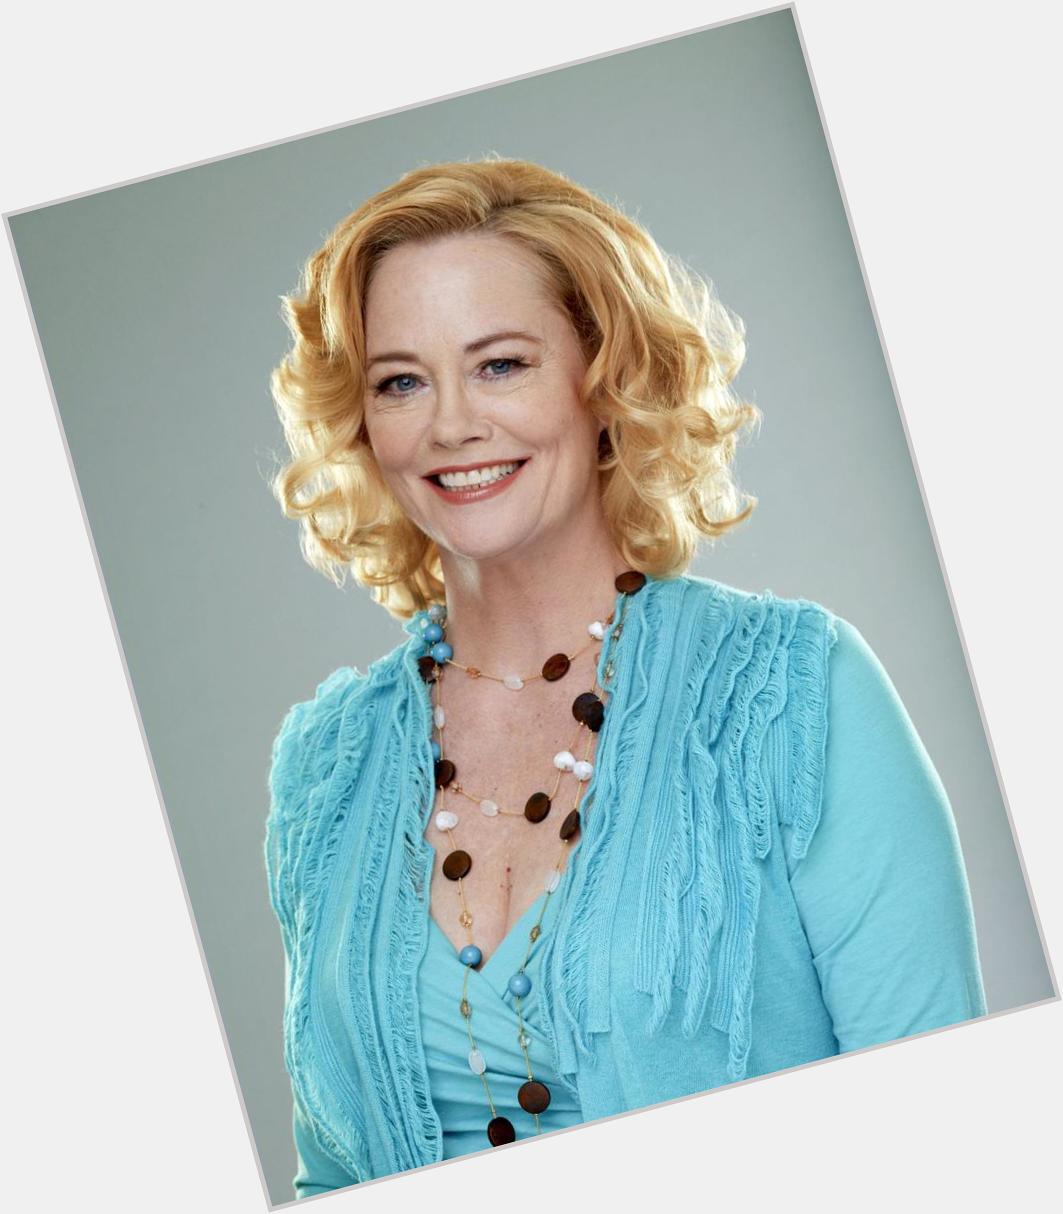 Happy Birthday Cybill Shepherd. One of the best actresses Hollywood has produced. Queen of comic timing :) ! 